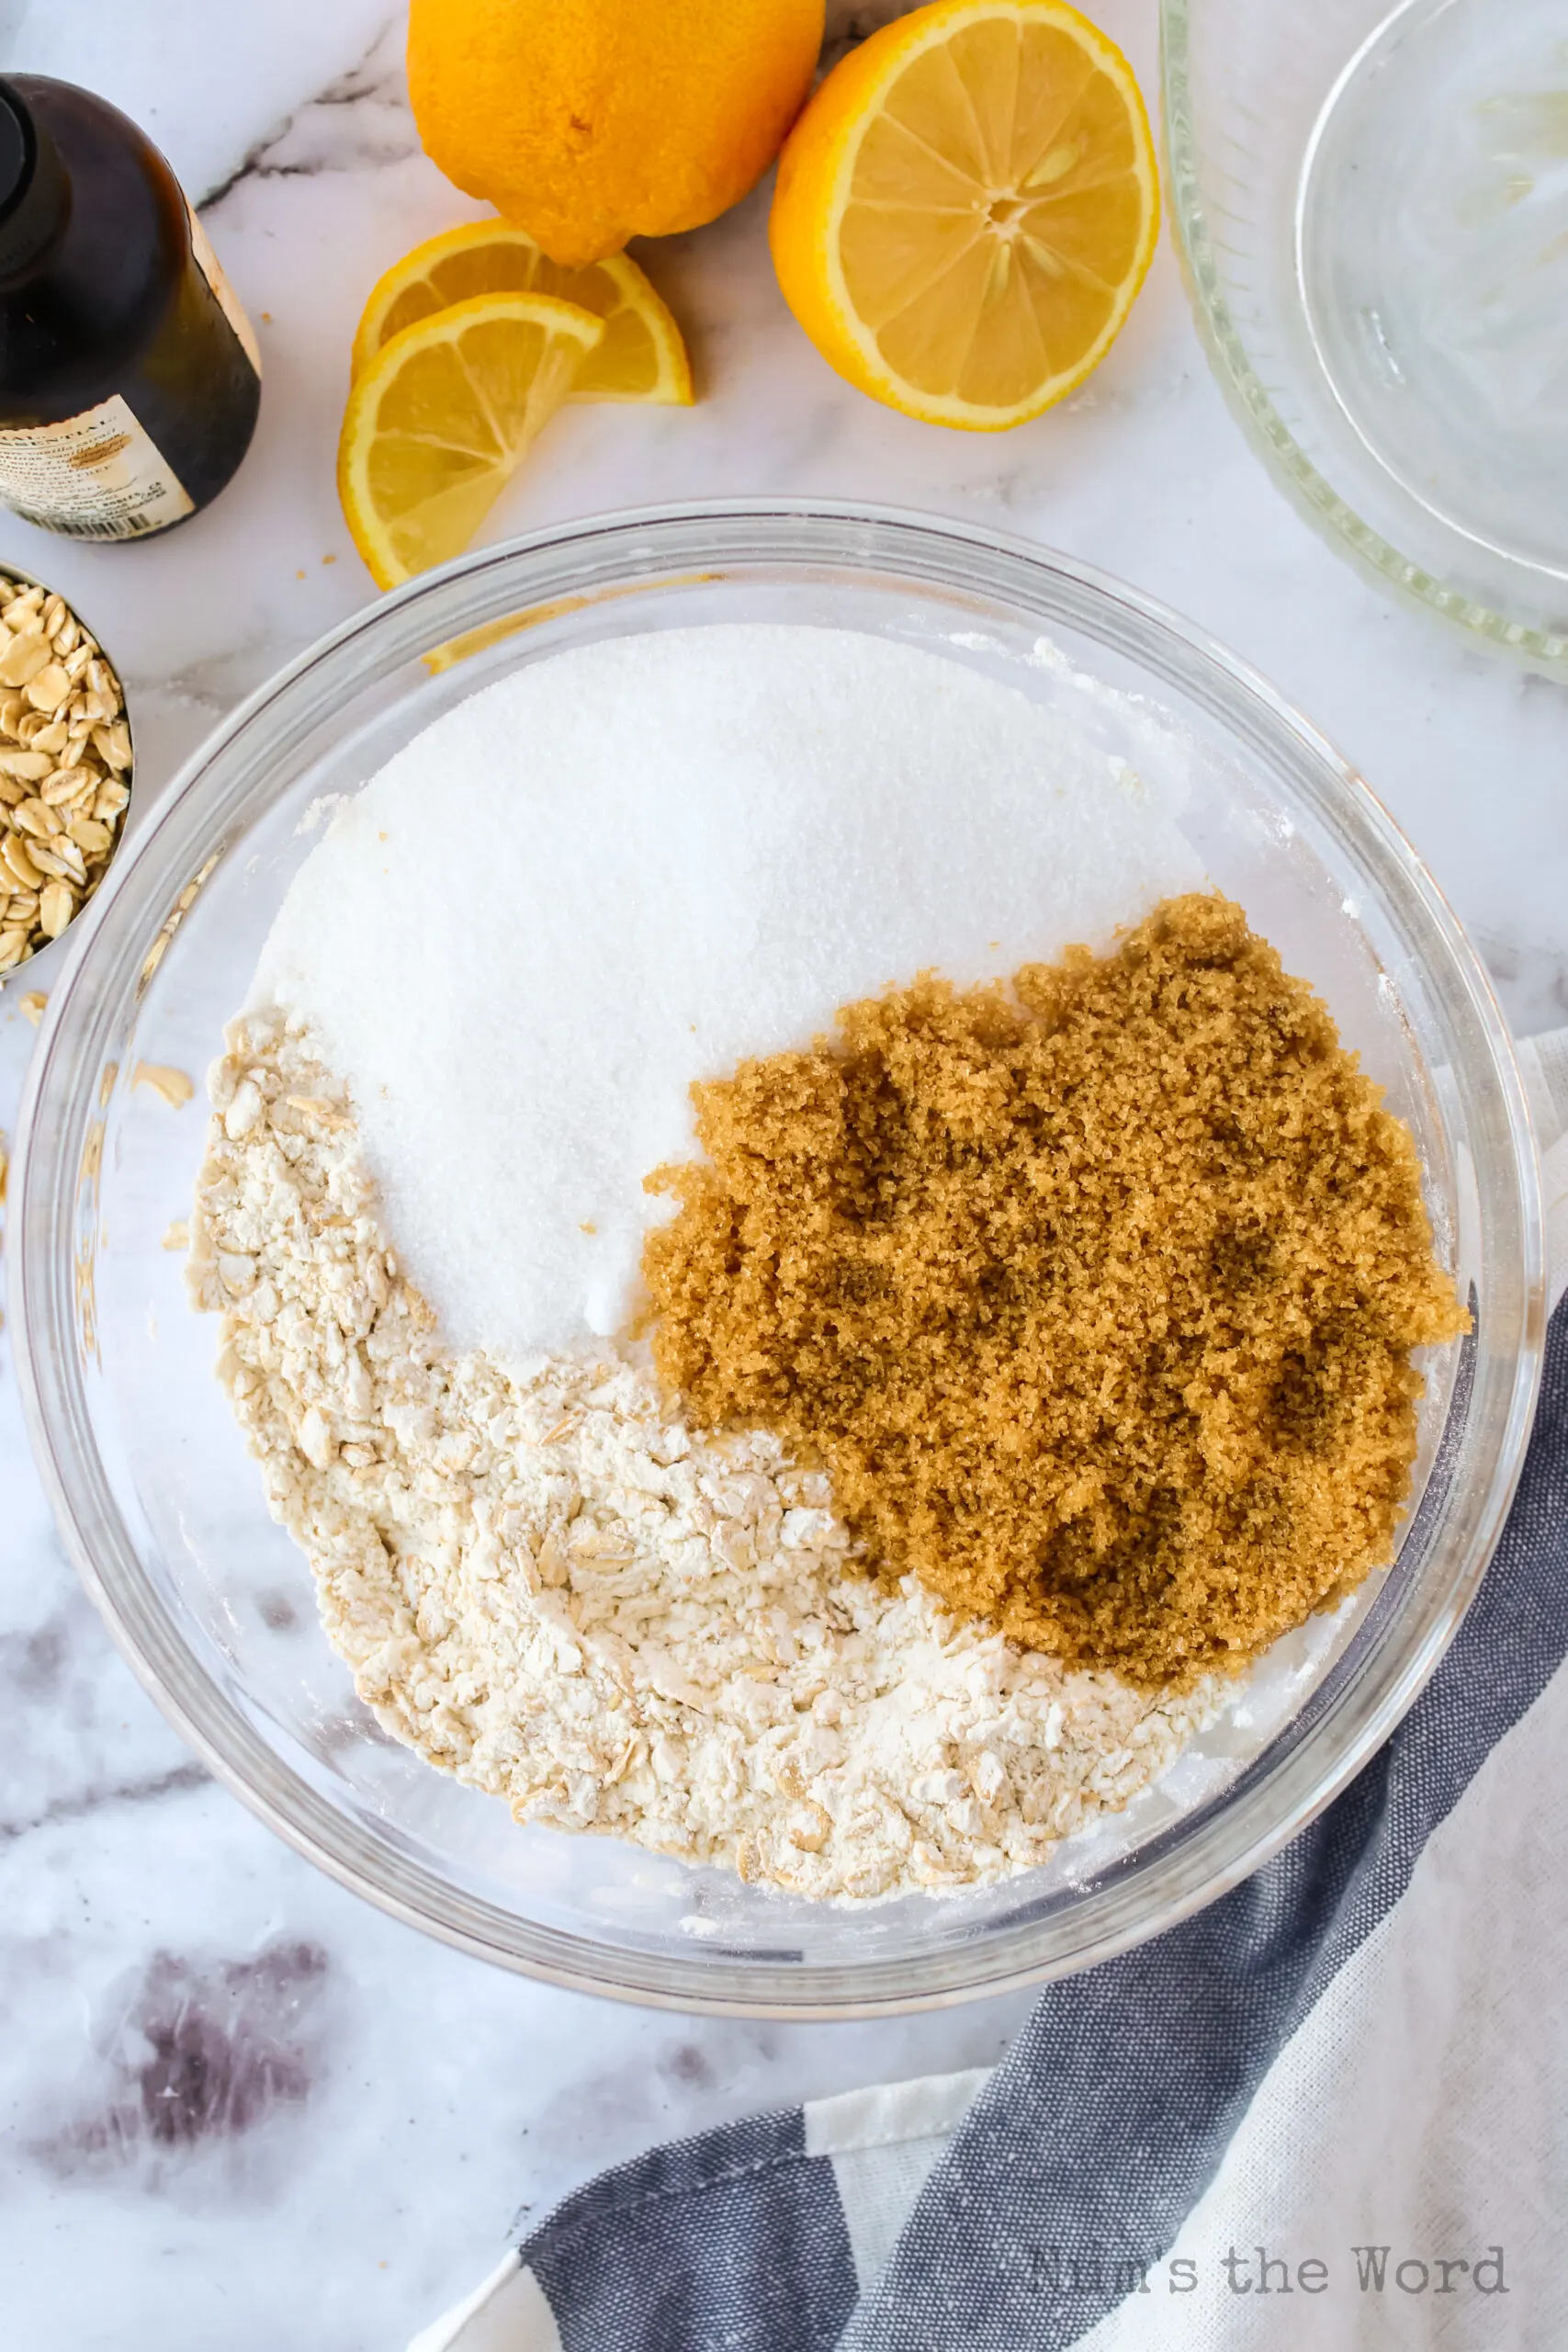 brown sugar and white sugar added to oat mixture